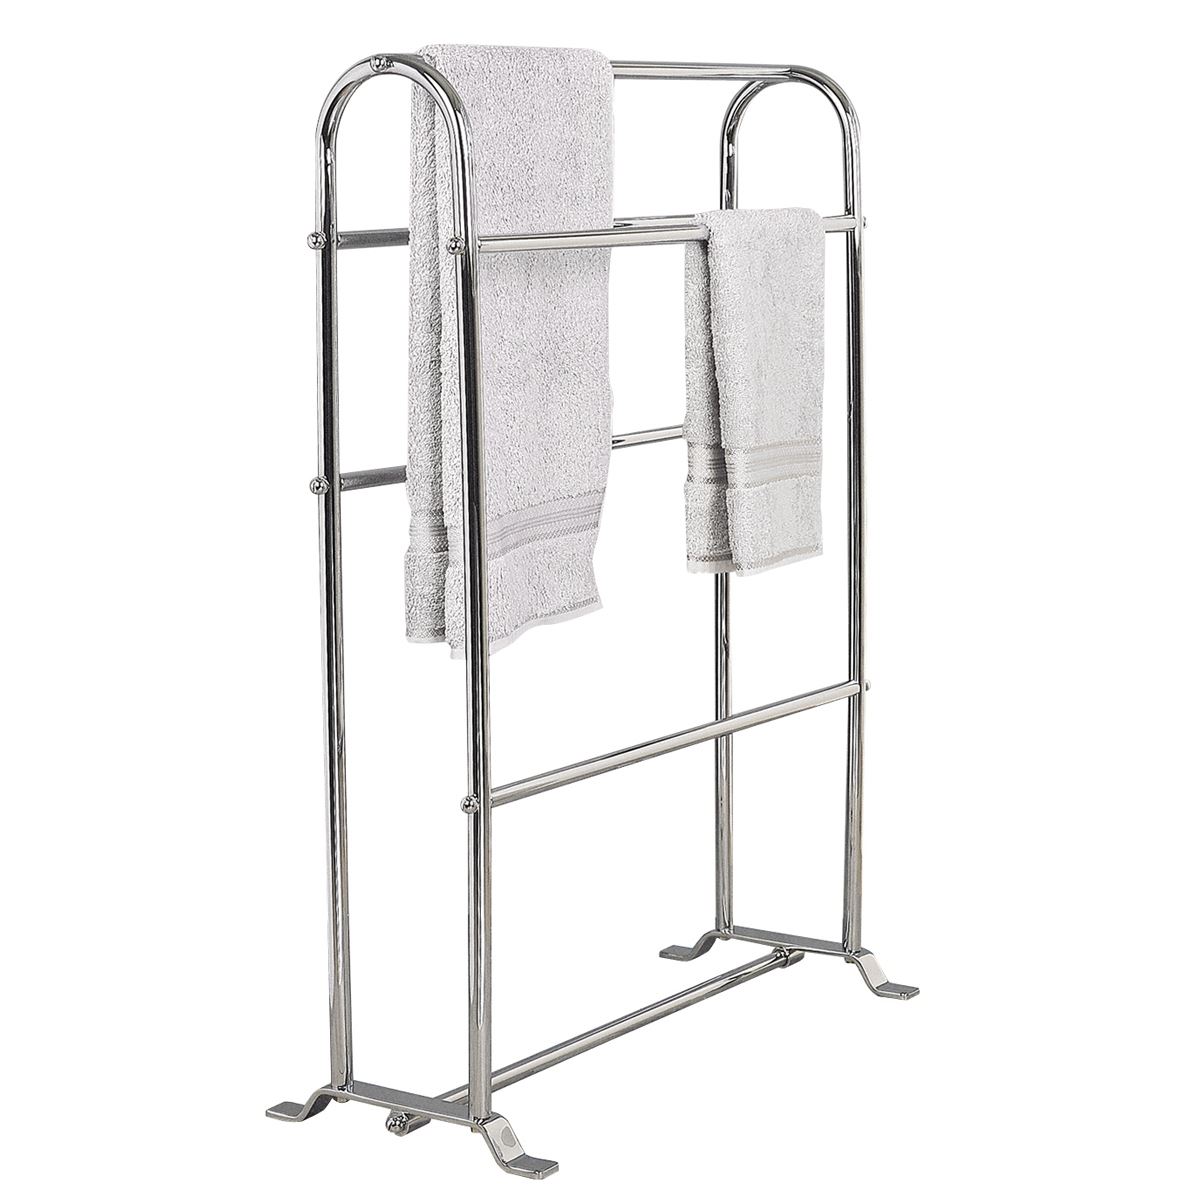 Miller Bathroom Towel Horse Questions & Answers